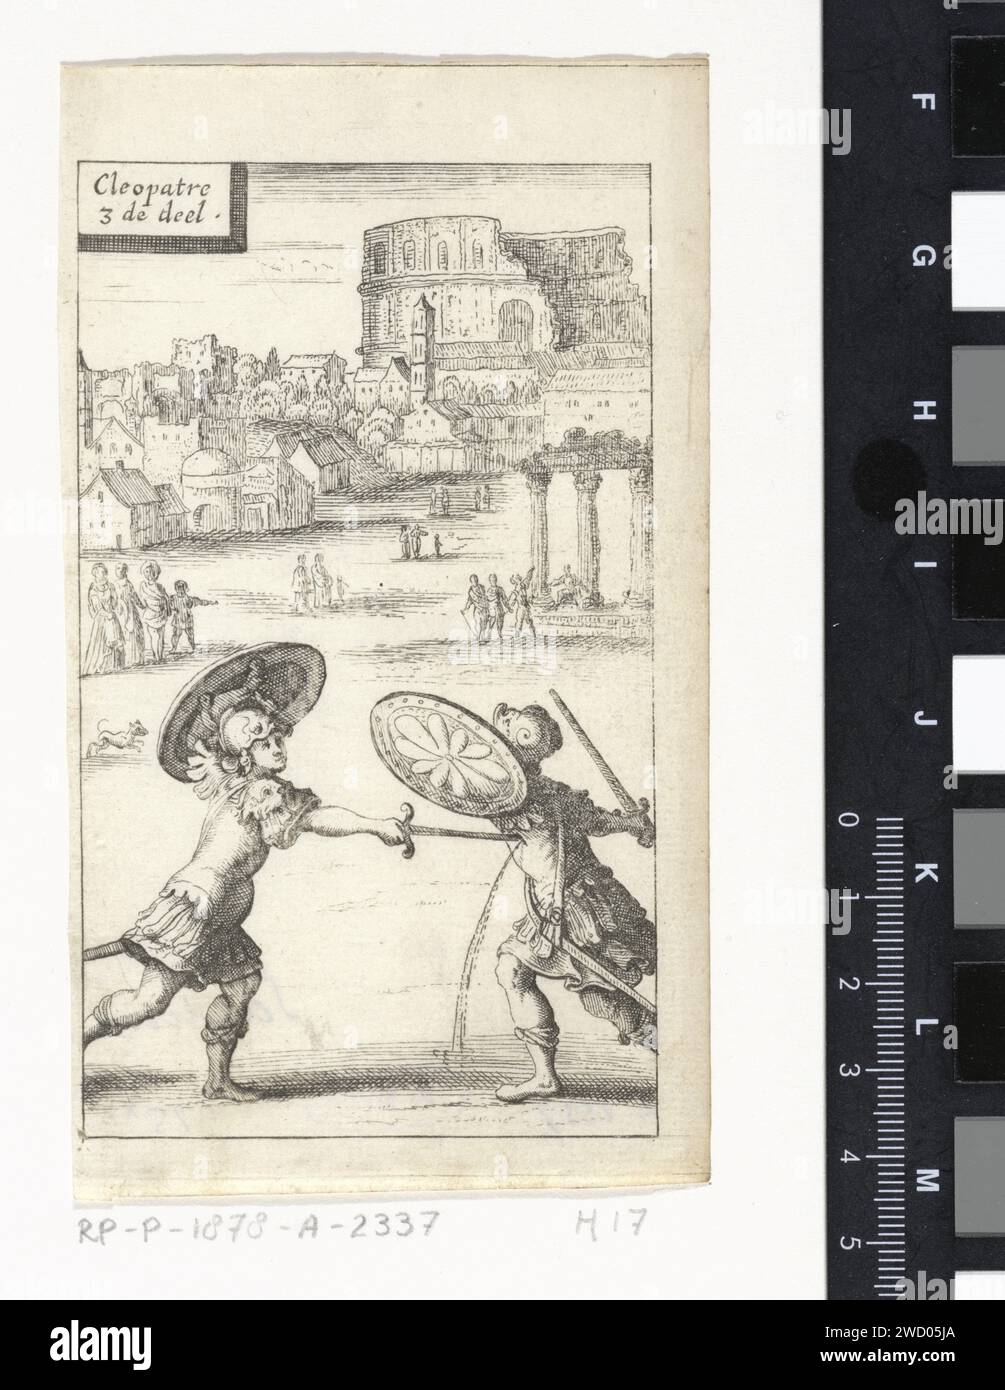 Two fighting men in armor, Abraham Dircksz. Santvoort, 1667 print In the front, two men, soldiers or gladiators. The left man puts the right man in his side. Some people watch. In the distance a city, Rome (?) With, among other things, a church and a partly expired amphitheater. print maker: Netherlandspublisher: Amsterdam paper etching title-page. fight of gladiators. the soldier; the soldier's life. fighting. ruin of a building  architecture. theatre (building) - AA - open-air performances. city-view, and landscape with man-made constructions (+ city(-scape) with figures, staffage) Stock Photo